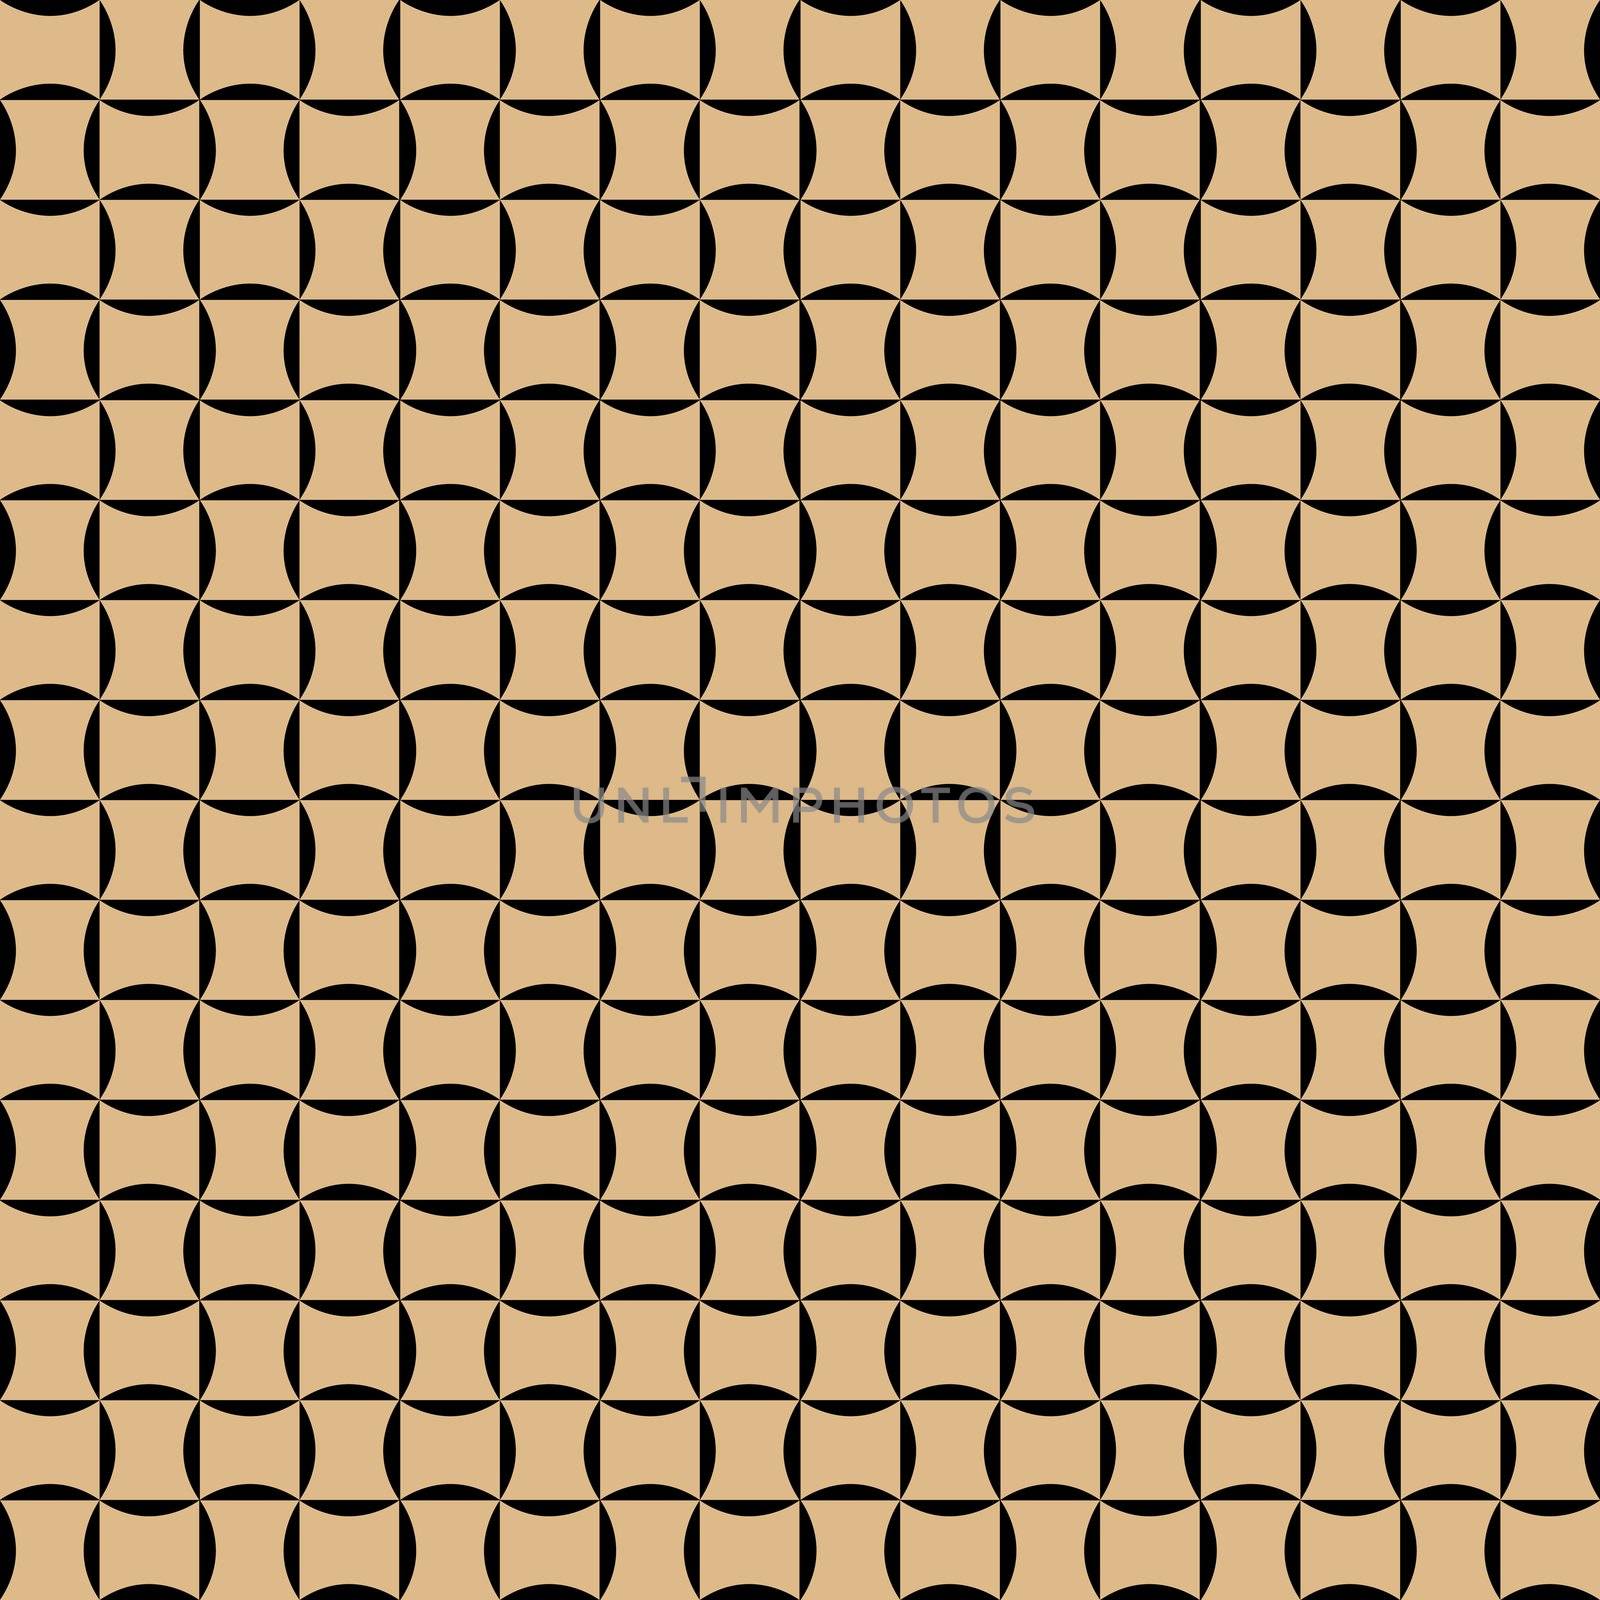 stylized basket texture, vector art illustration; more textures in my gallery